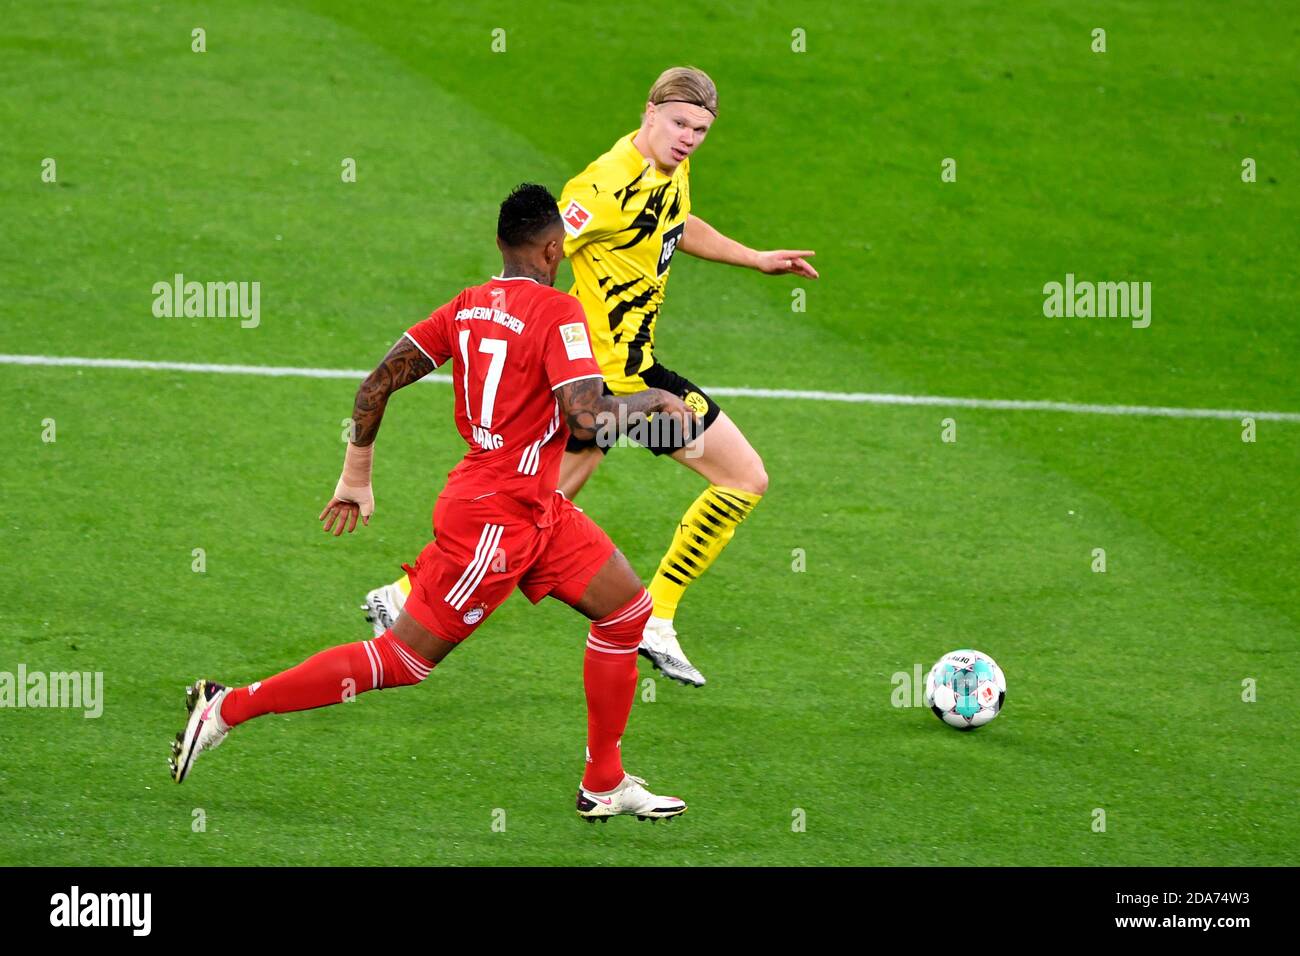 left to right Jerome BOATENG (M) and Erling HAALAND (DO), action, duels, soccer 1st Bundesliga, 7th matchday, Borussia Dortmund (DO) - FC Bayern Munich (M) 2: 3, on November 7th, 2020 in Dortmund / Germany. | usage worldwide Stock Photo